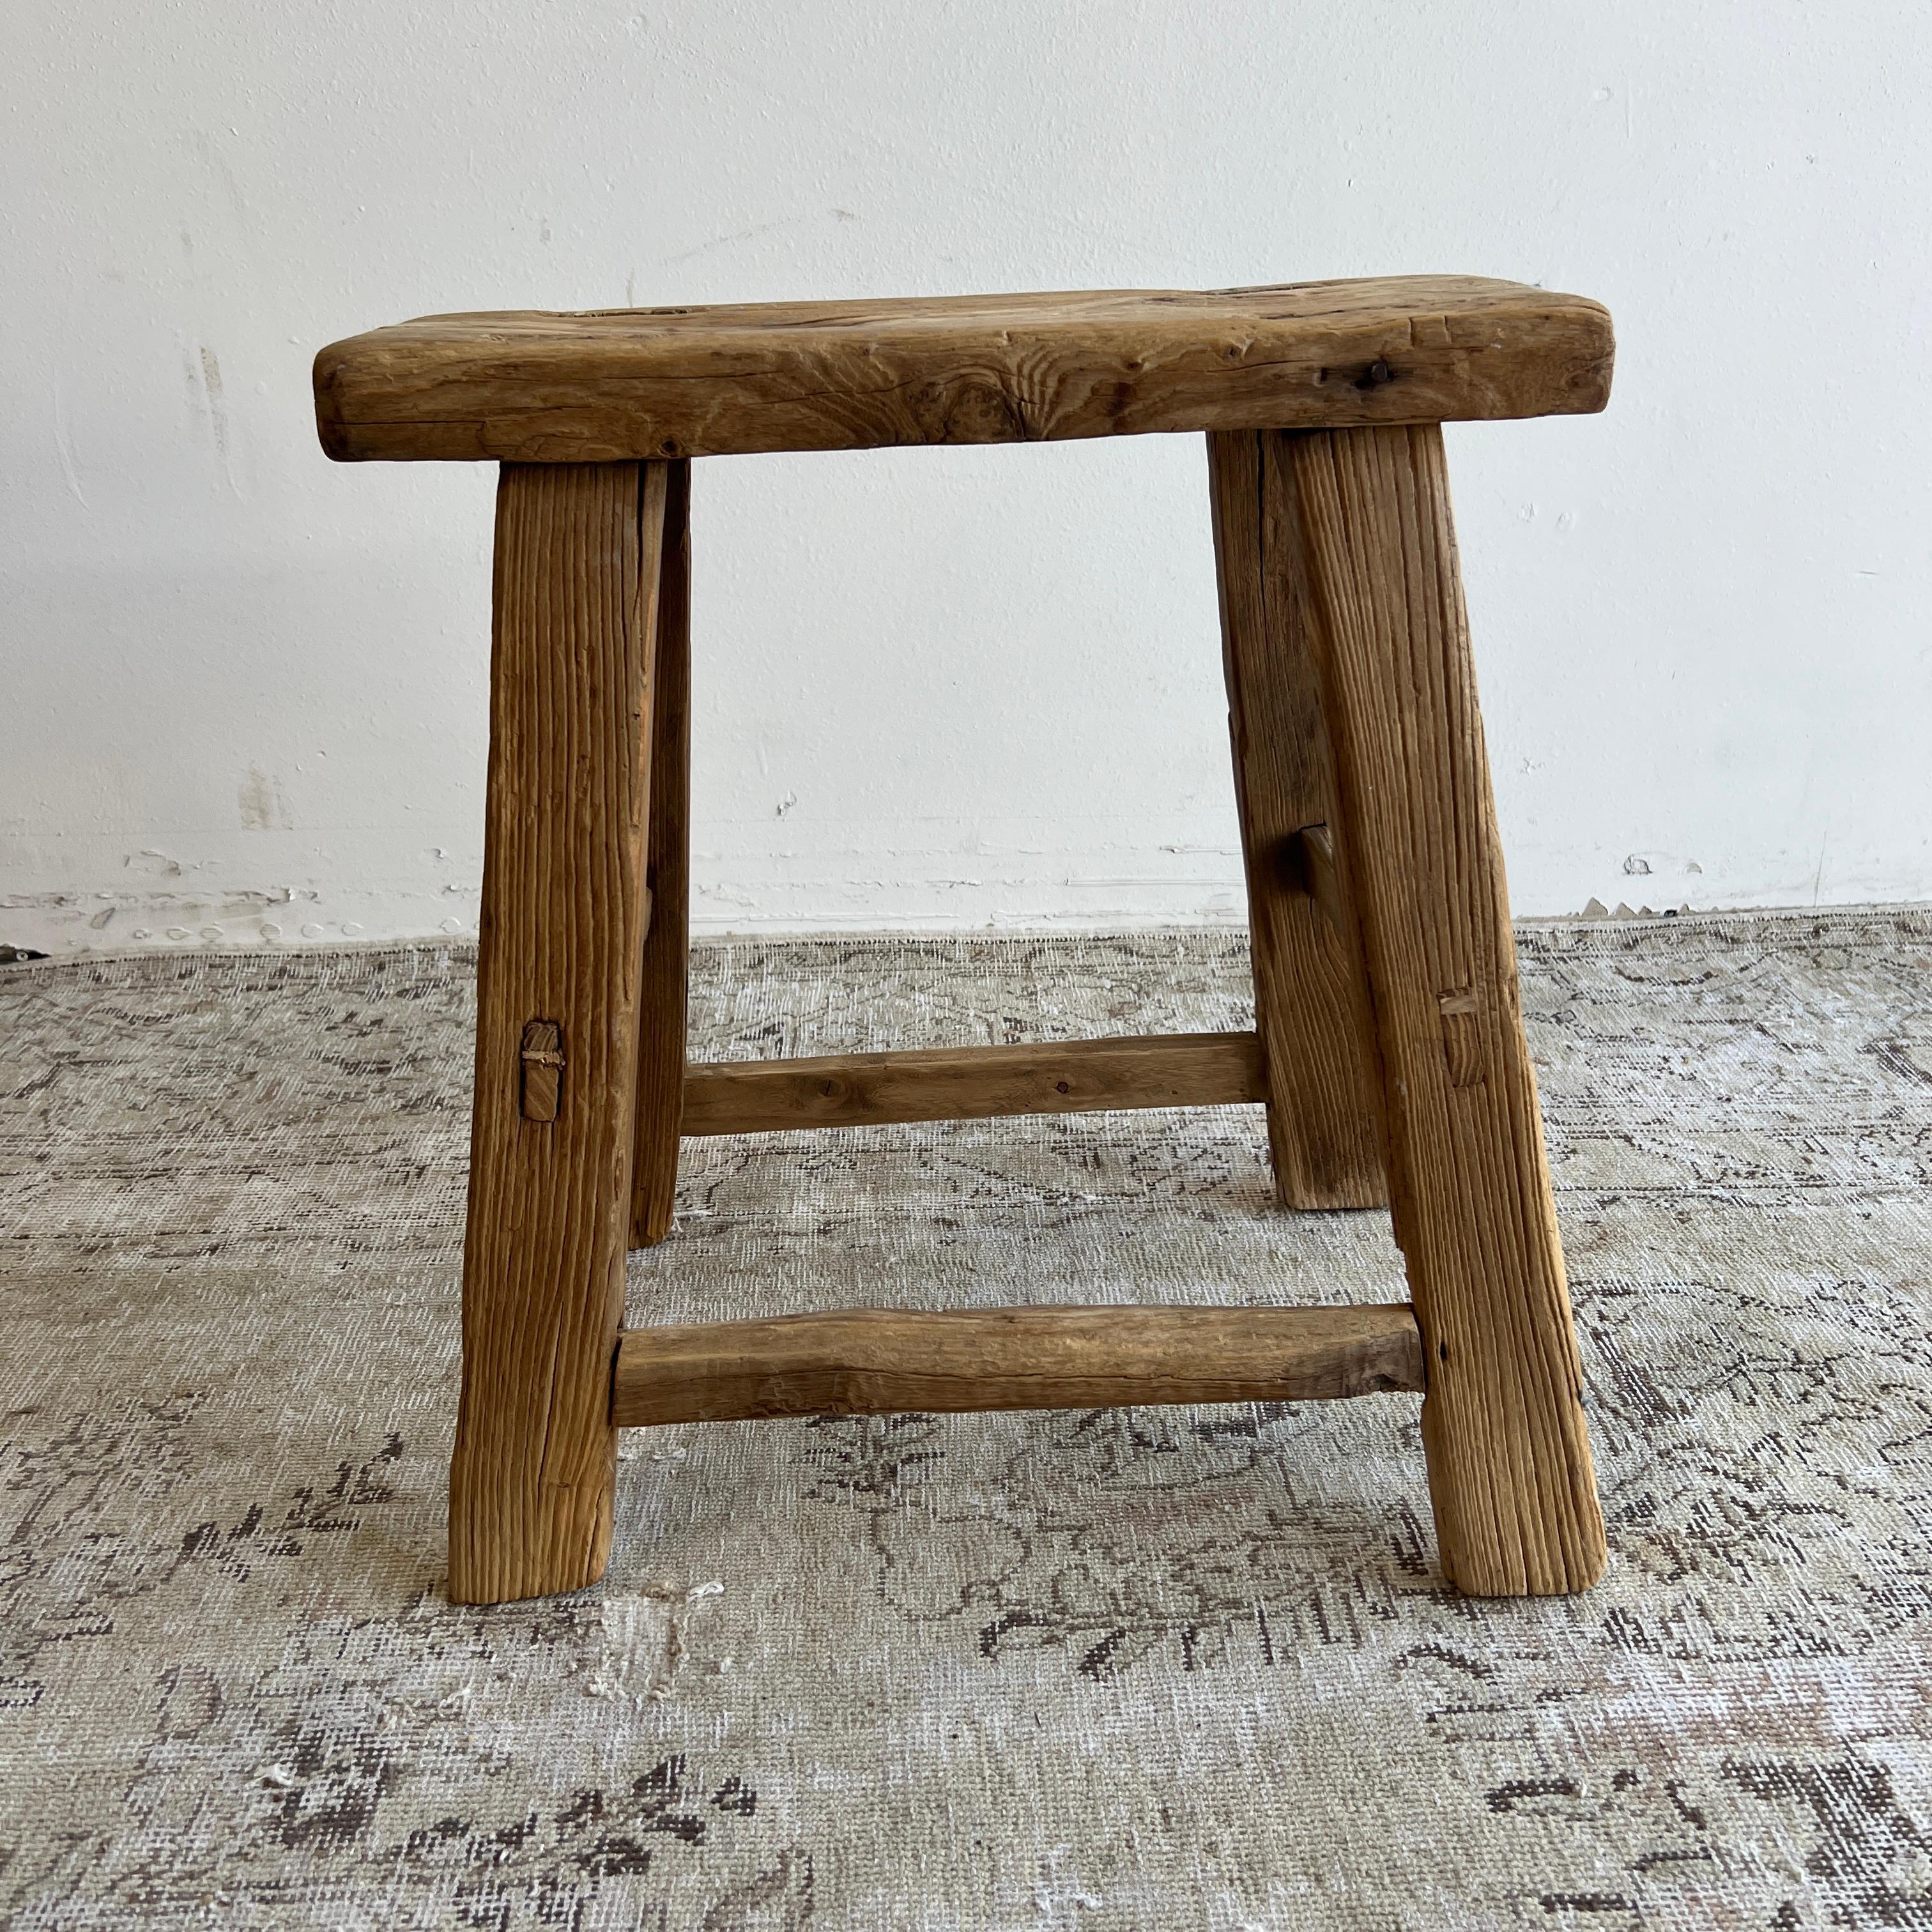 These are the real vintage antique elm wood stools! Beautiful antique patina, with weathering and age, these are solid and sturdy ready for daily use, use as a table, stool, drink table, they are great for any space.
Size: 19